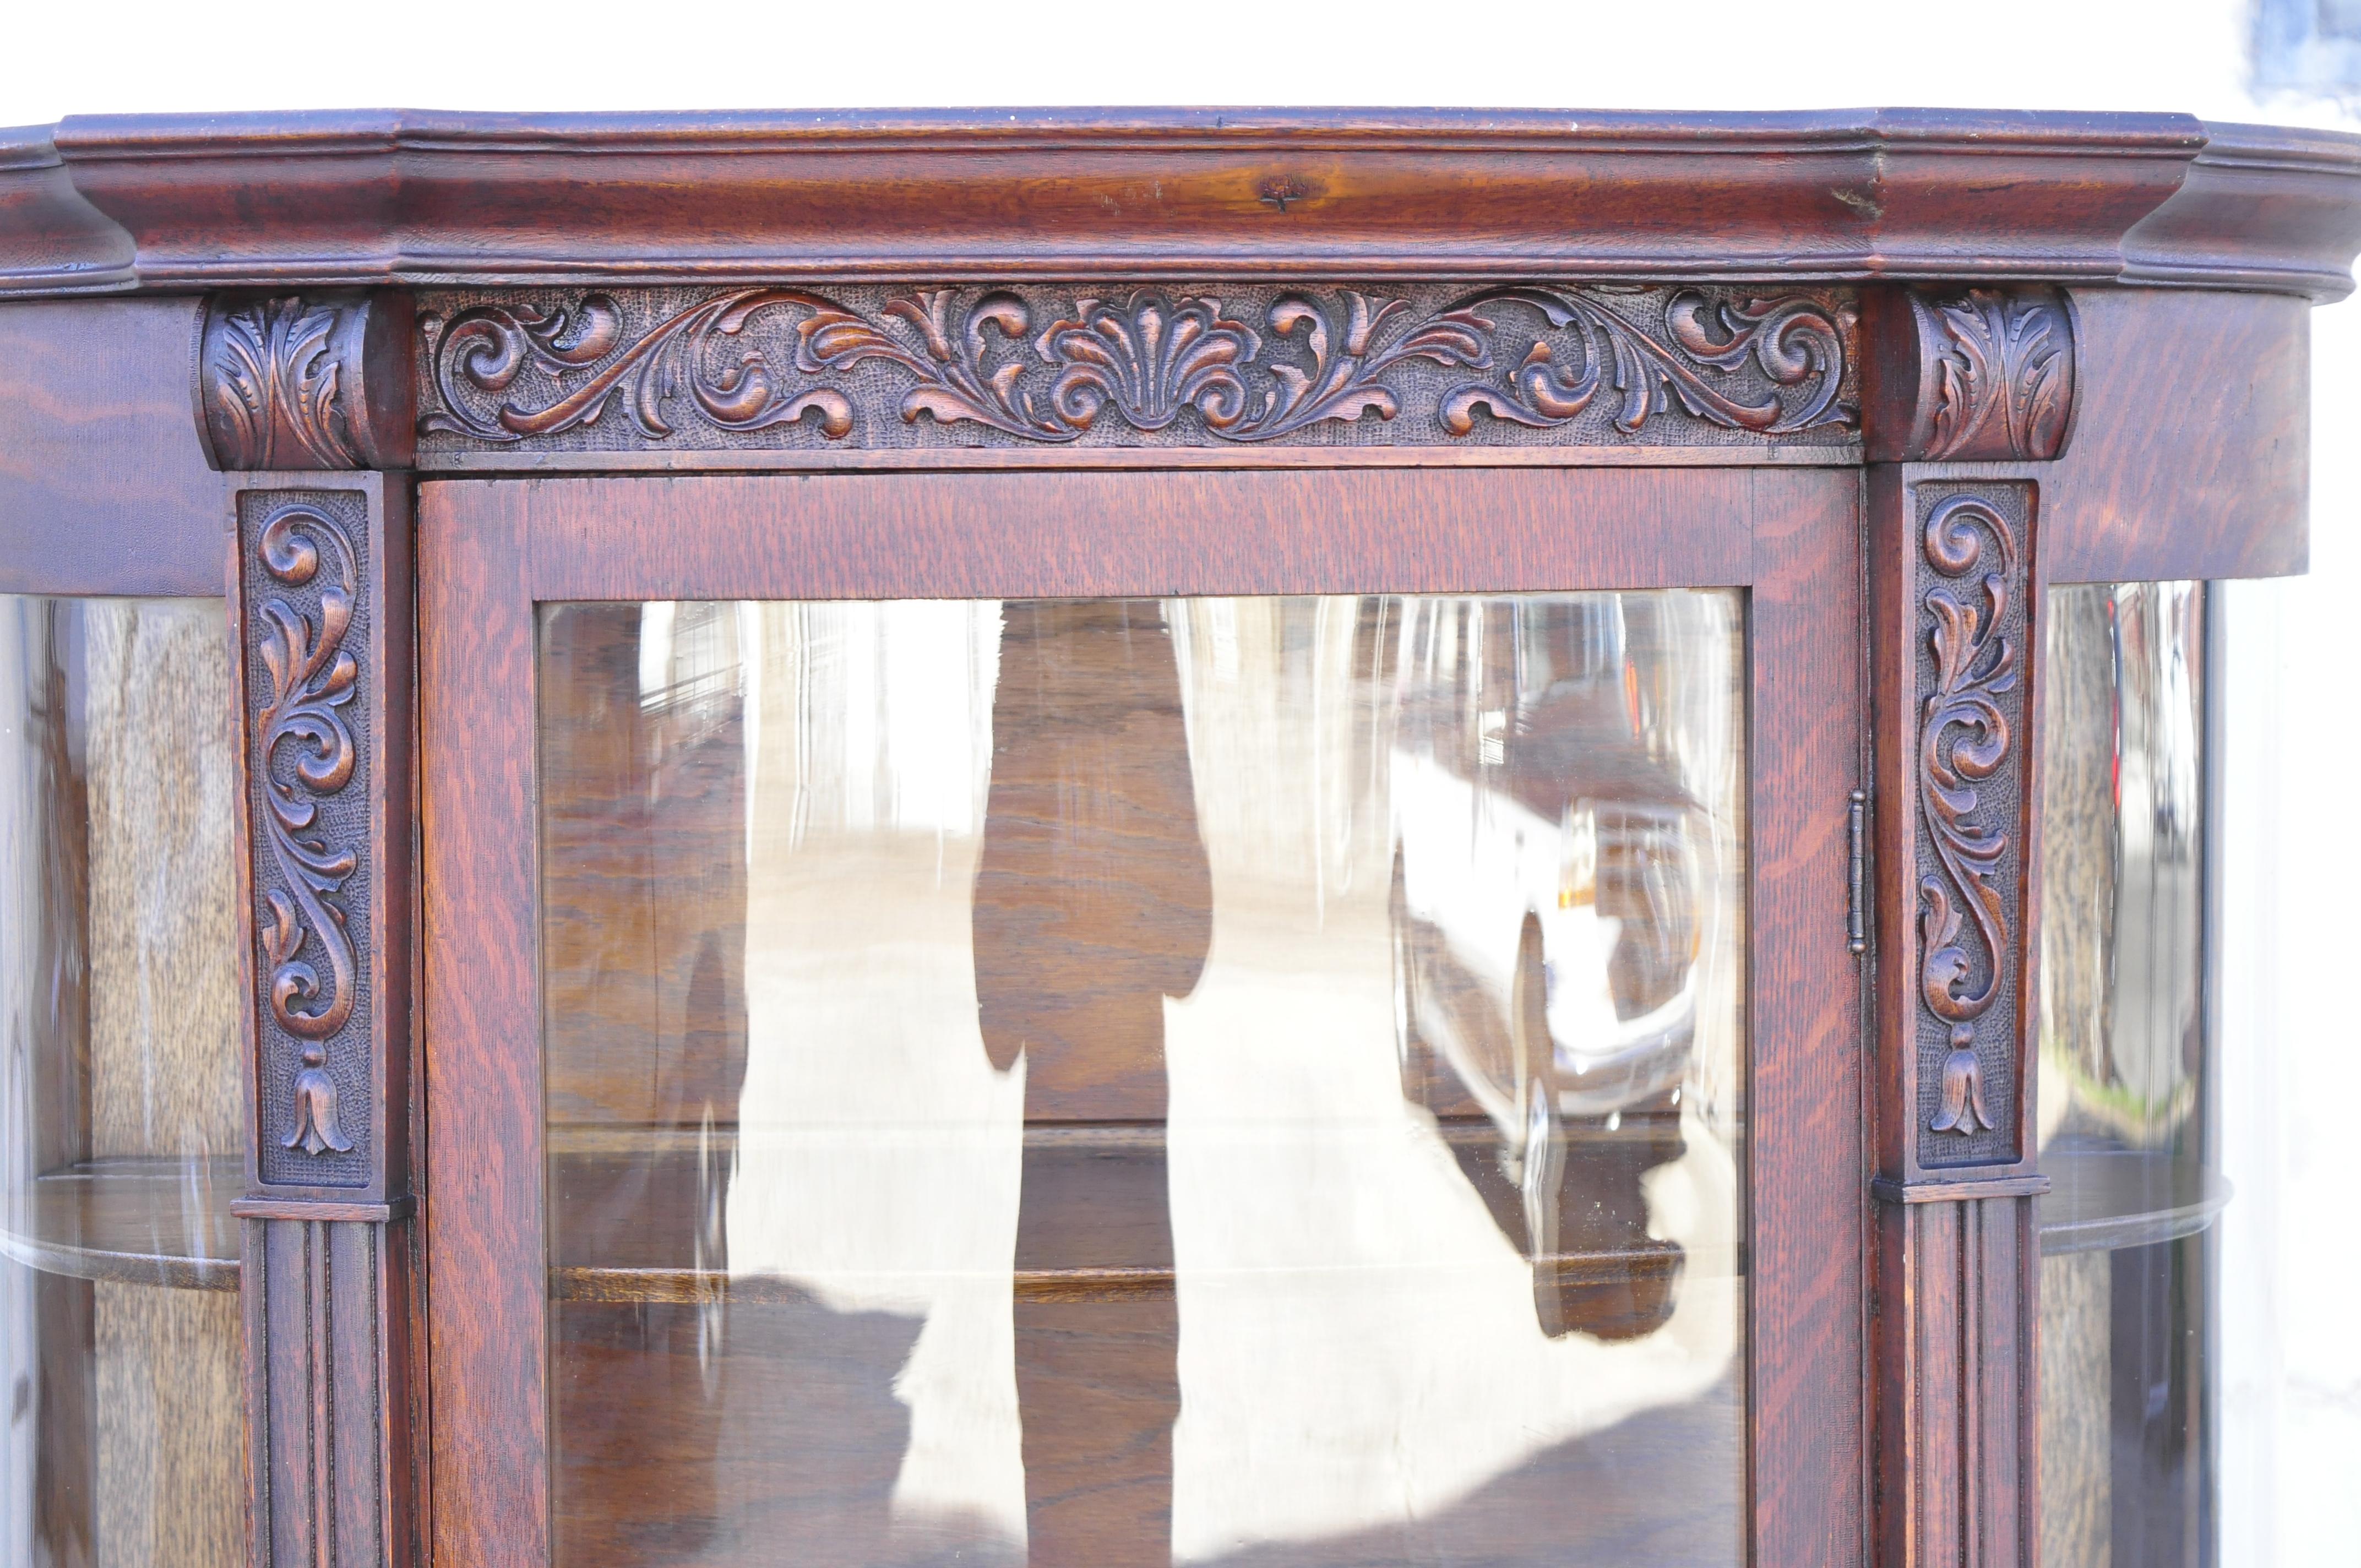 Antique American Empire tiger oak bow glass paw feet china cabinet curio by Gettysburg Furniture Company. Item features bow glass front and sides, carved paw feet, beautiful wood grain, nicely carved details, no key, but unlocked, very nice antique